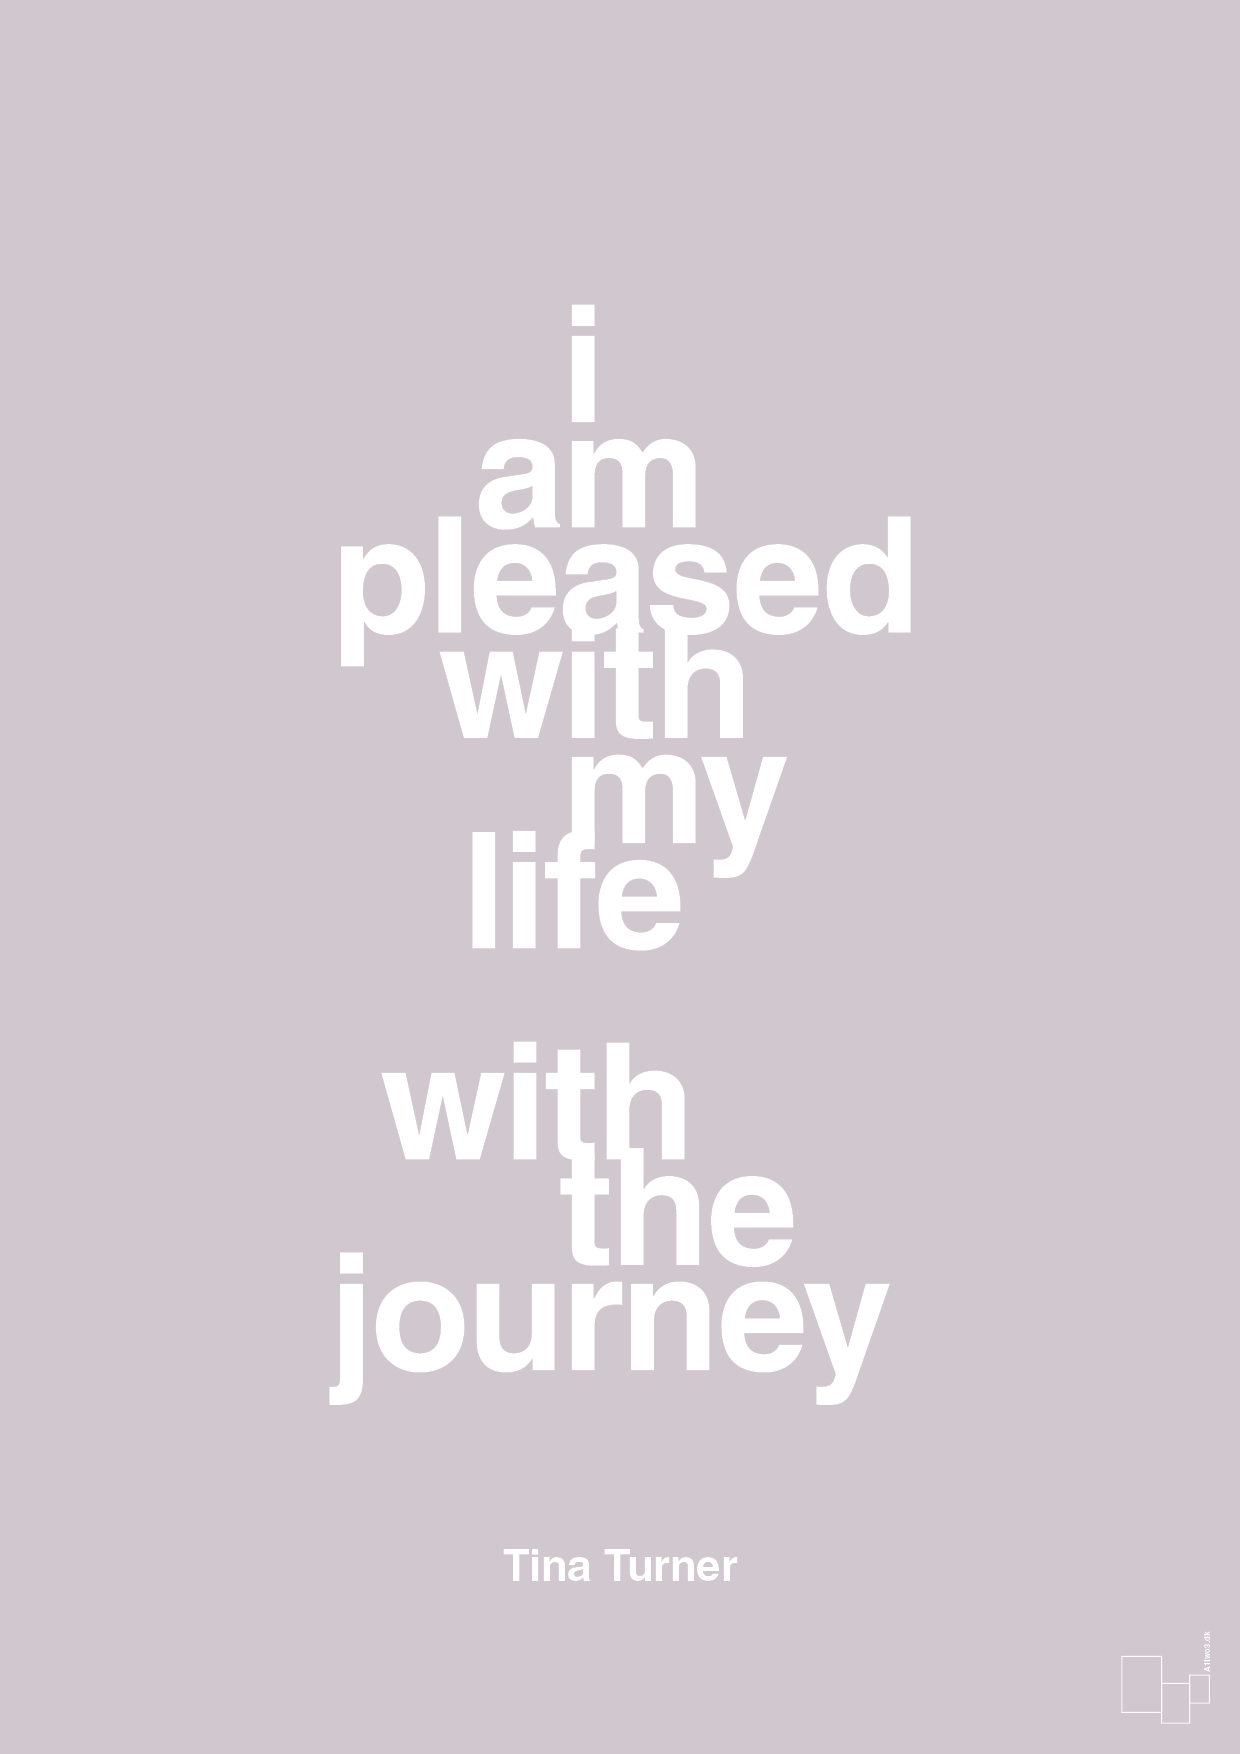 i am pleased with my life with the journey - Plakat med Citater i Dusty Lilac